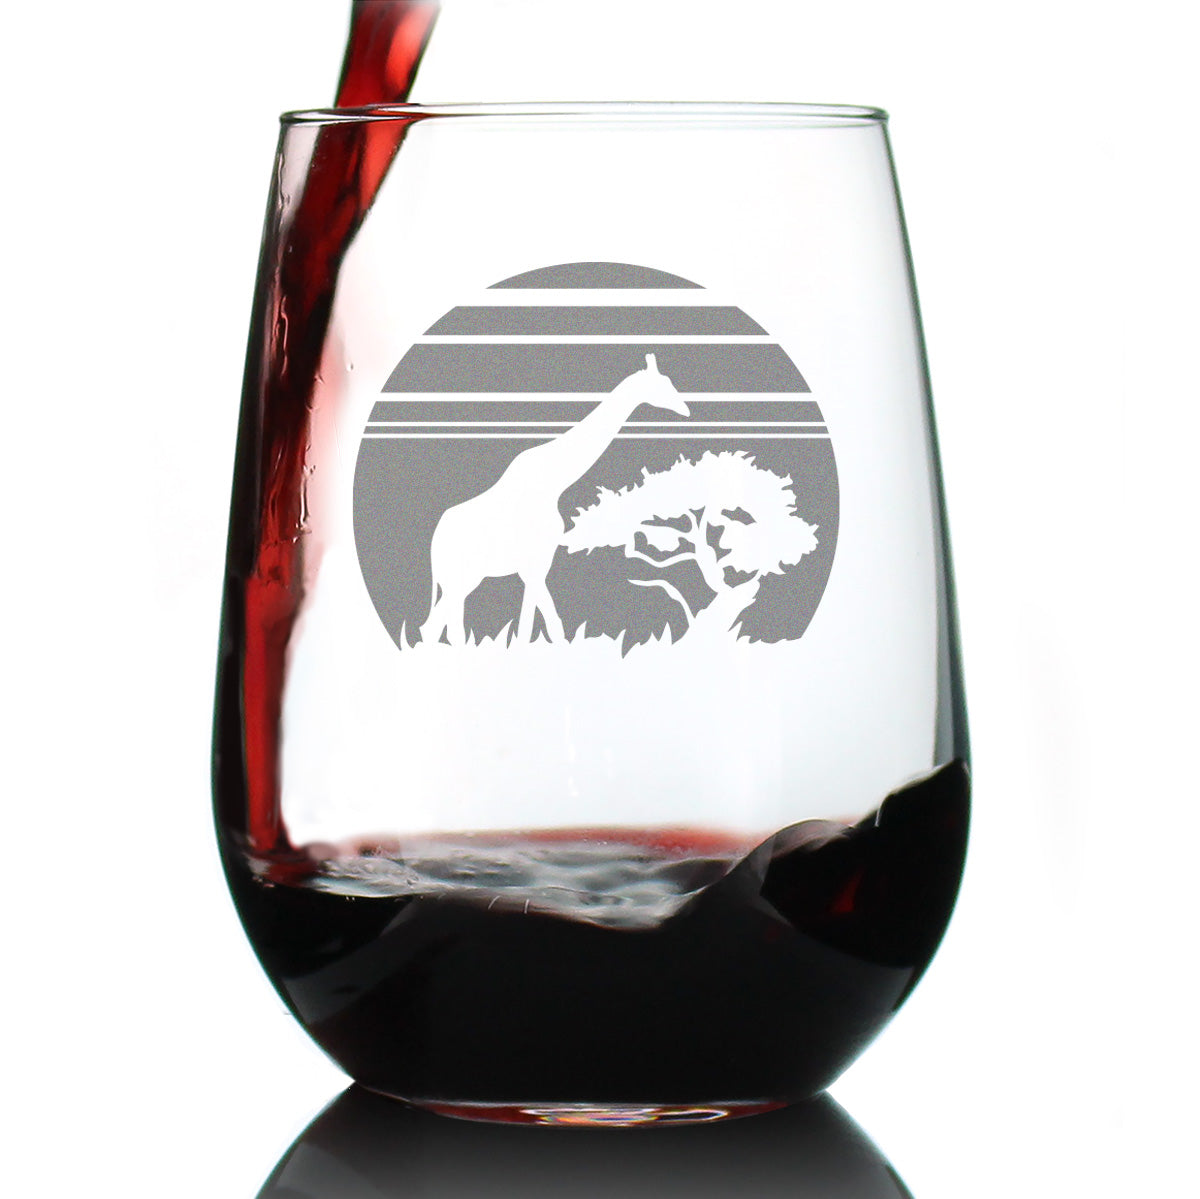 Giraffe Sunset Stemless Wine Glass - Fun Safari Themed Decor and Gifts for Lovers of African Wild Animals - Large 17 Oz Glasses